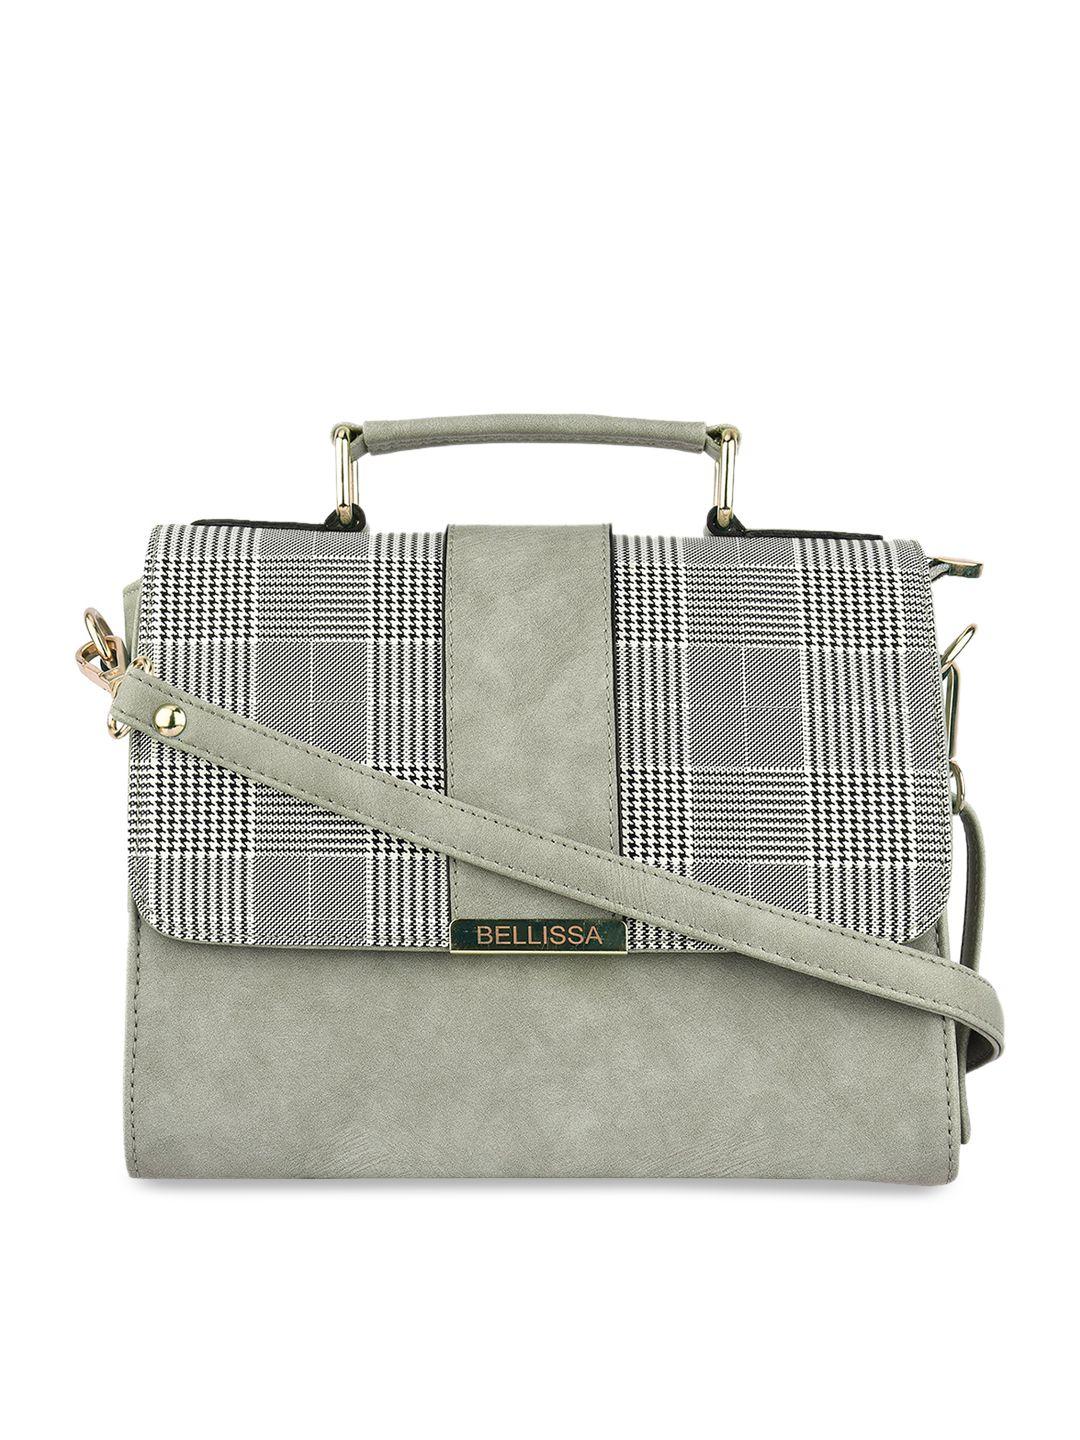 bellissa grey checked printed pu oversized structured satchel with applique